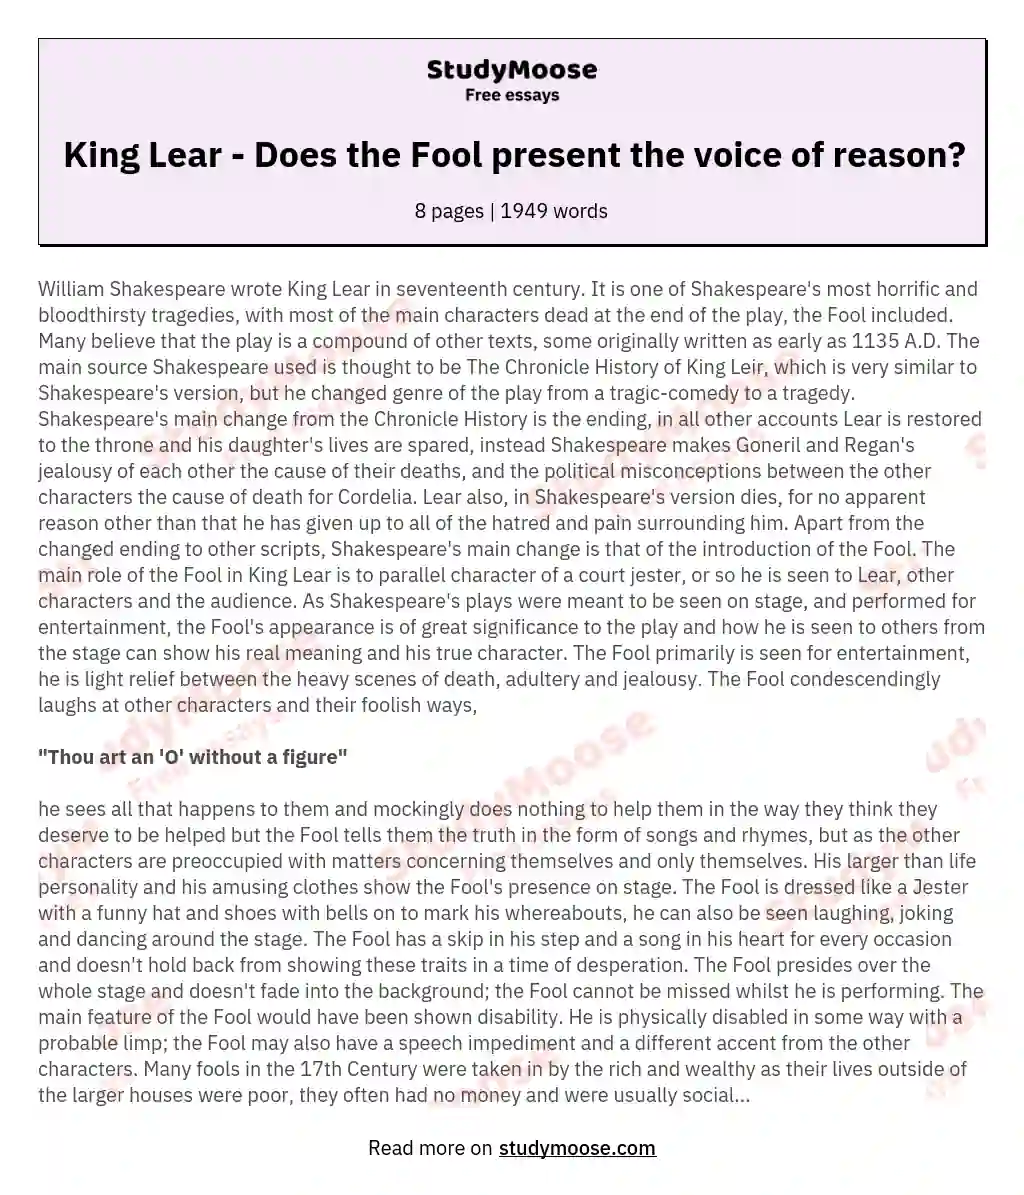 King Lear - Does the Fool present the voice of reason? essay